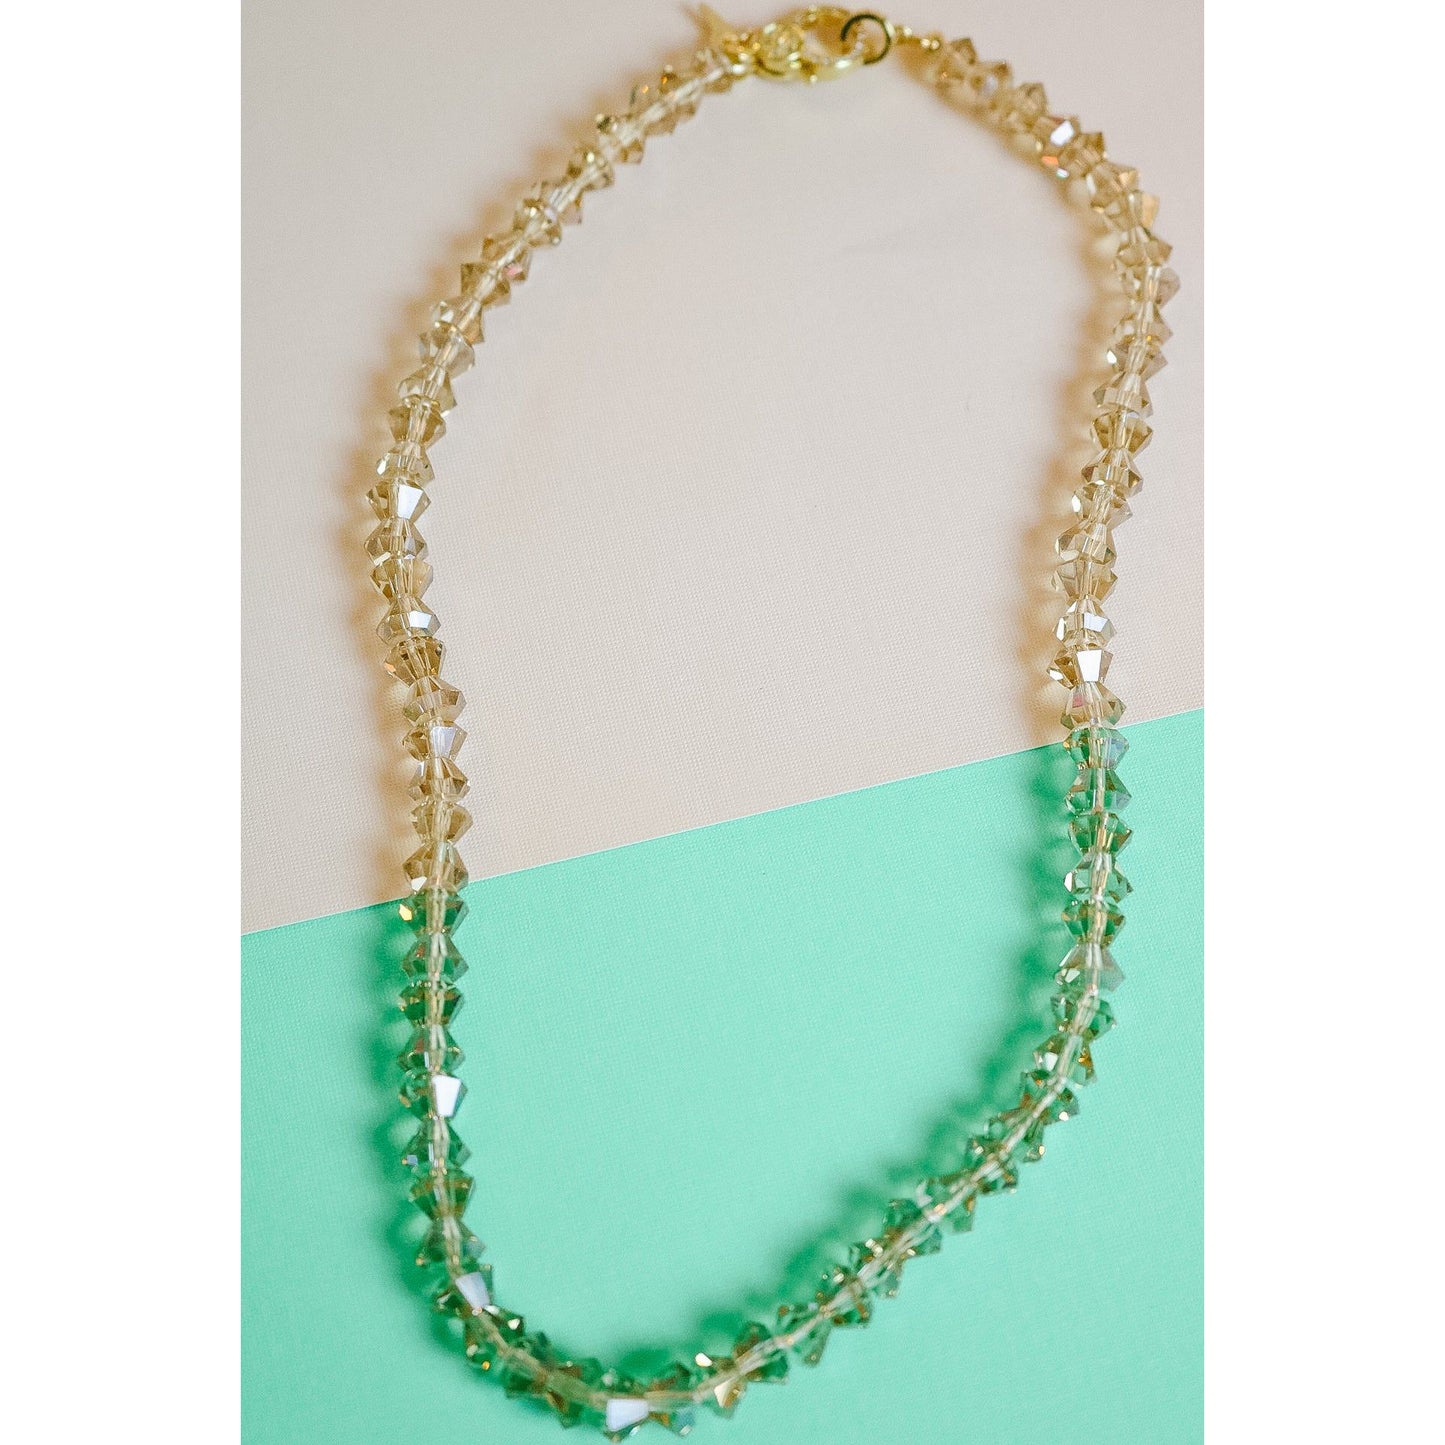 The crystal bow hand knotted necklace features a repeating bow pattern on a 100% silk cord